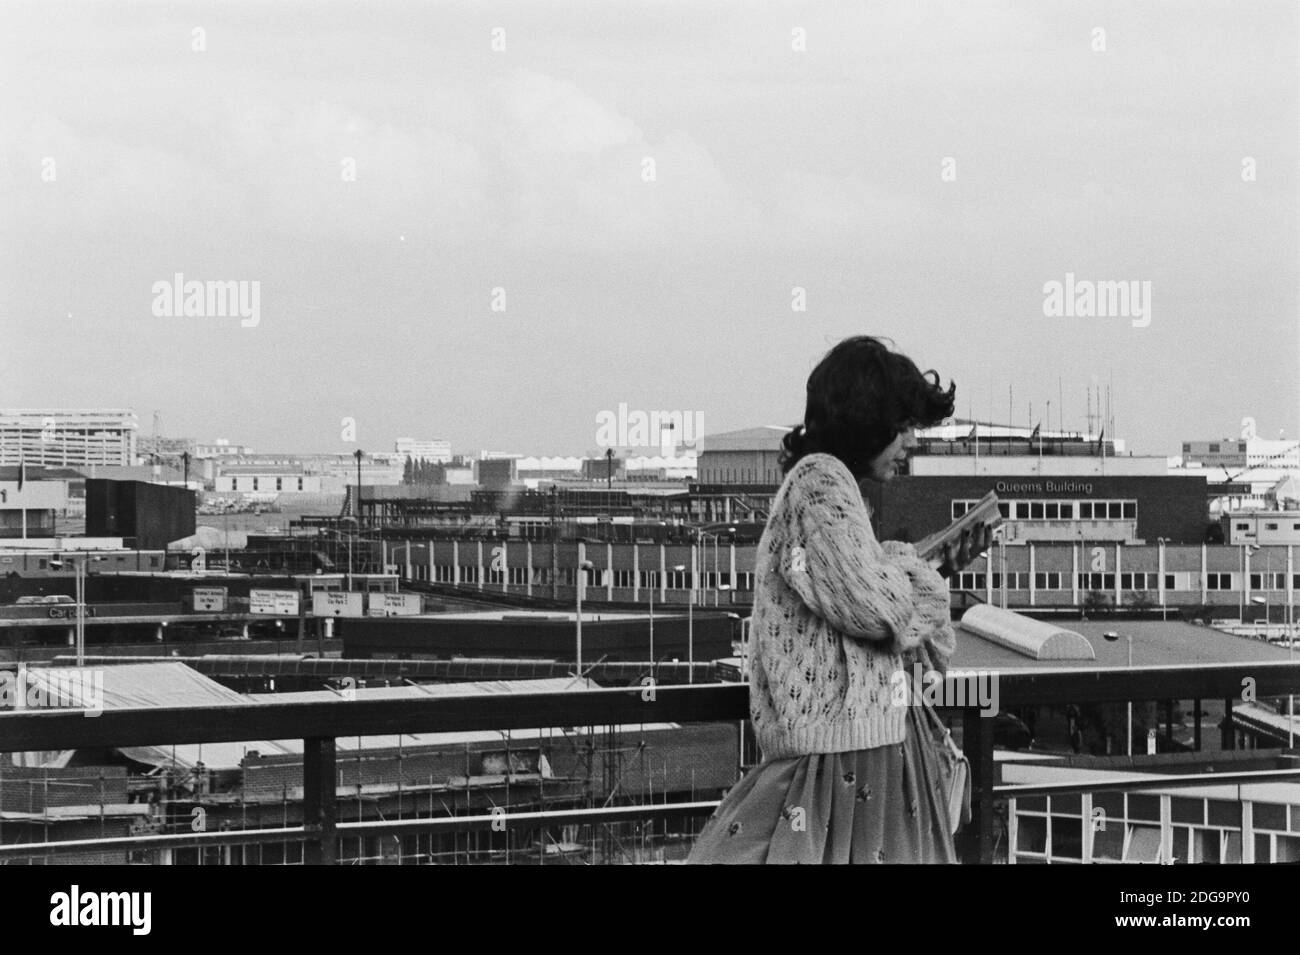 Archival monochrome image of a young woman reading a book on the observation deck of Heathrow Airport, London, 1979, showing the Queen's Building by Frederick Gibberd, built 1955, demolished 2009 Stock Photo